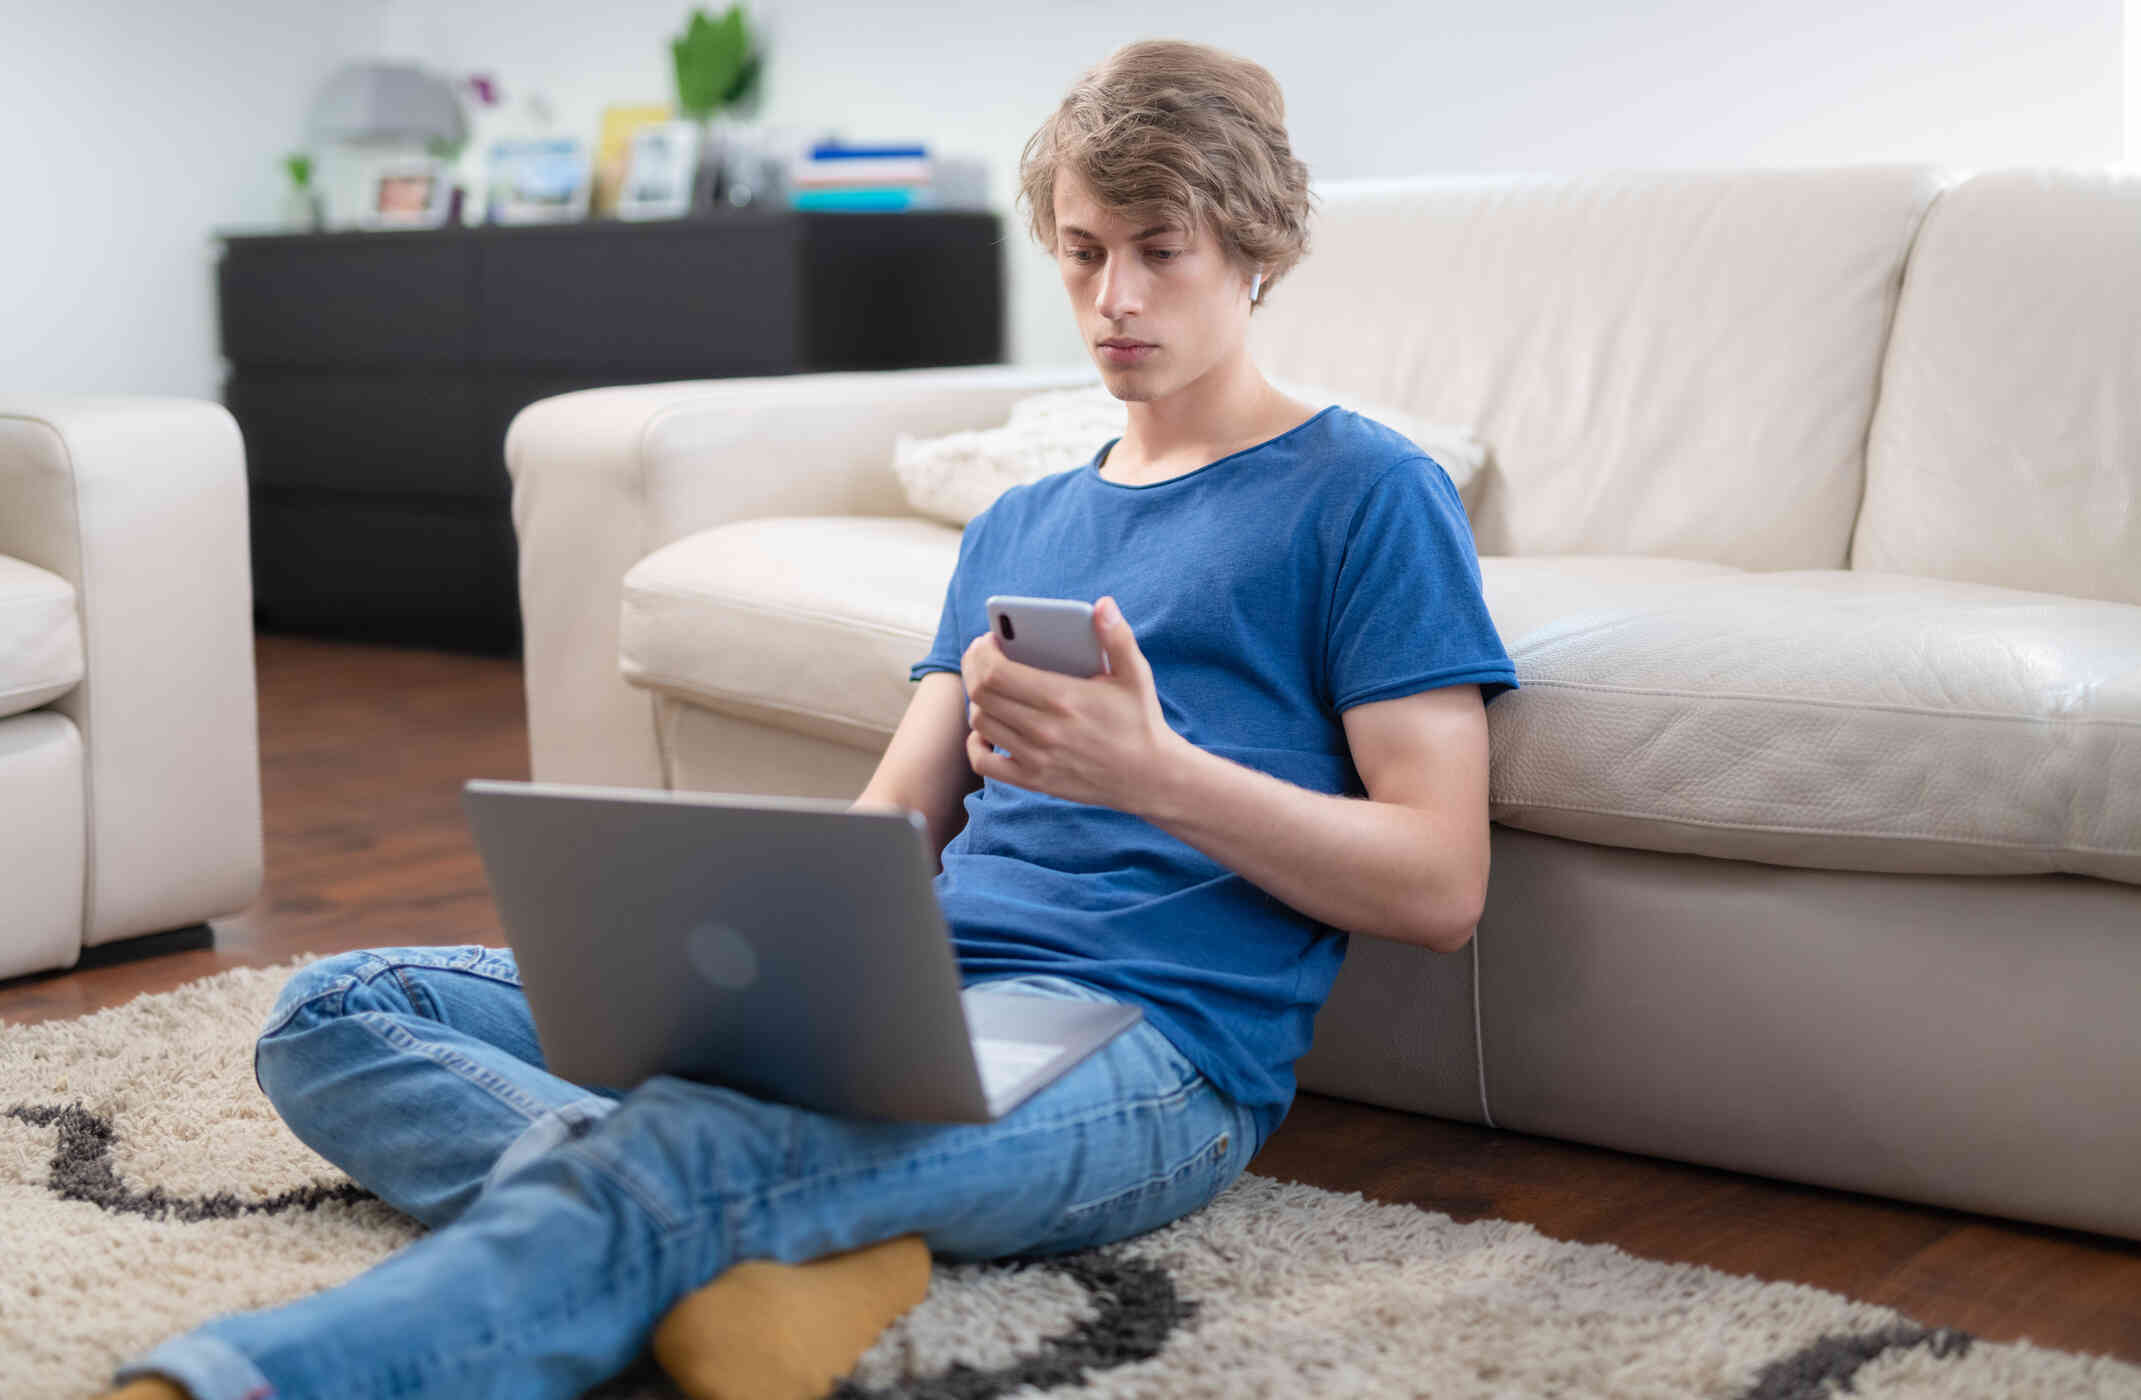 A teen boy in a blue shirt sits on the floor with his back against the couch and his laptop open in his lap as he looks down at the cellphone in his hand with a sad expression.